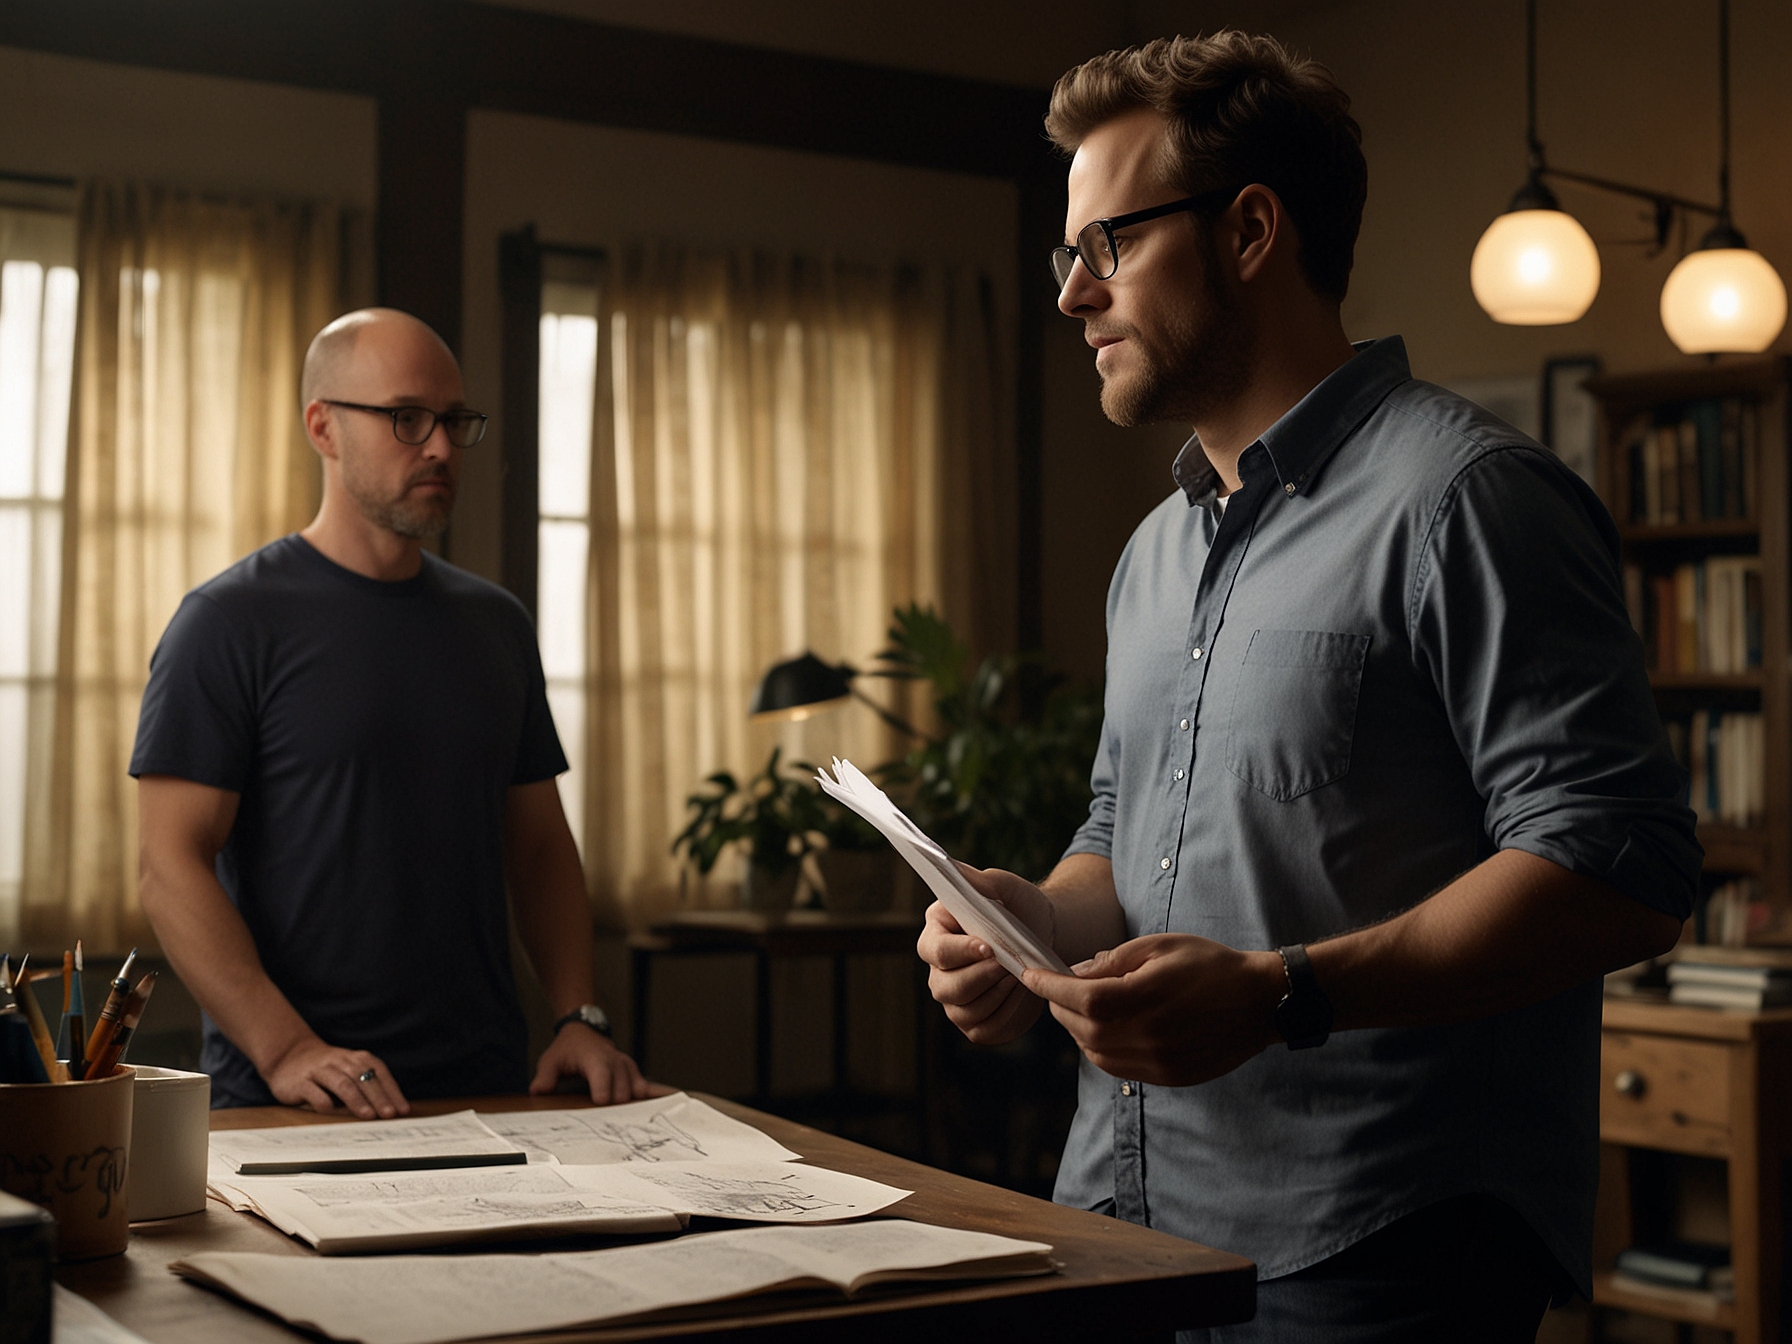 A behind-the-scenes shot of showrunners Damon Lindelof and Chris Mundy discussing a scene, emphasizing the collaborative effort and creative direction of HBO's 'Lanterns' series.